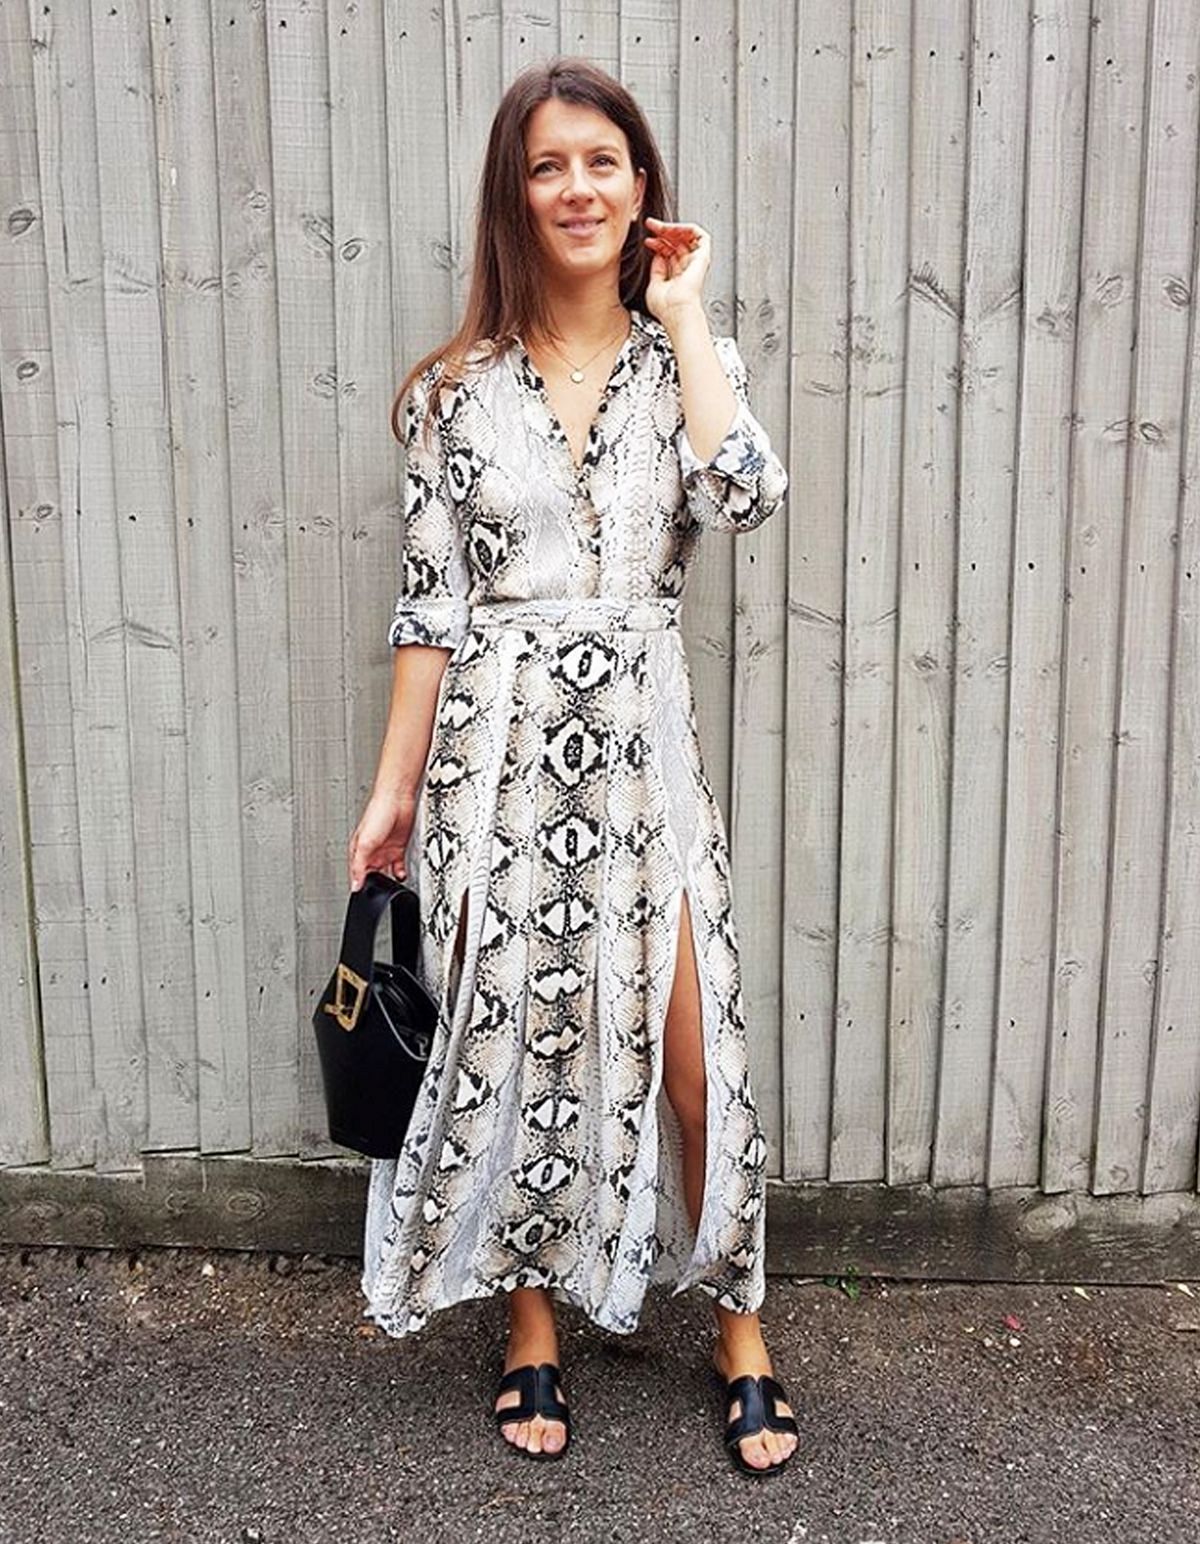 Snake print dress inspirations from whowhatwear.co.uk